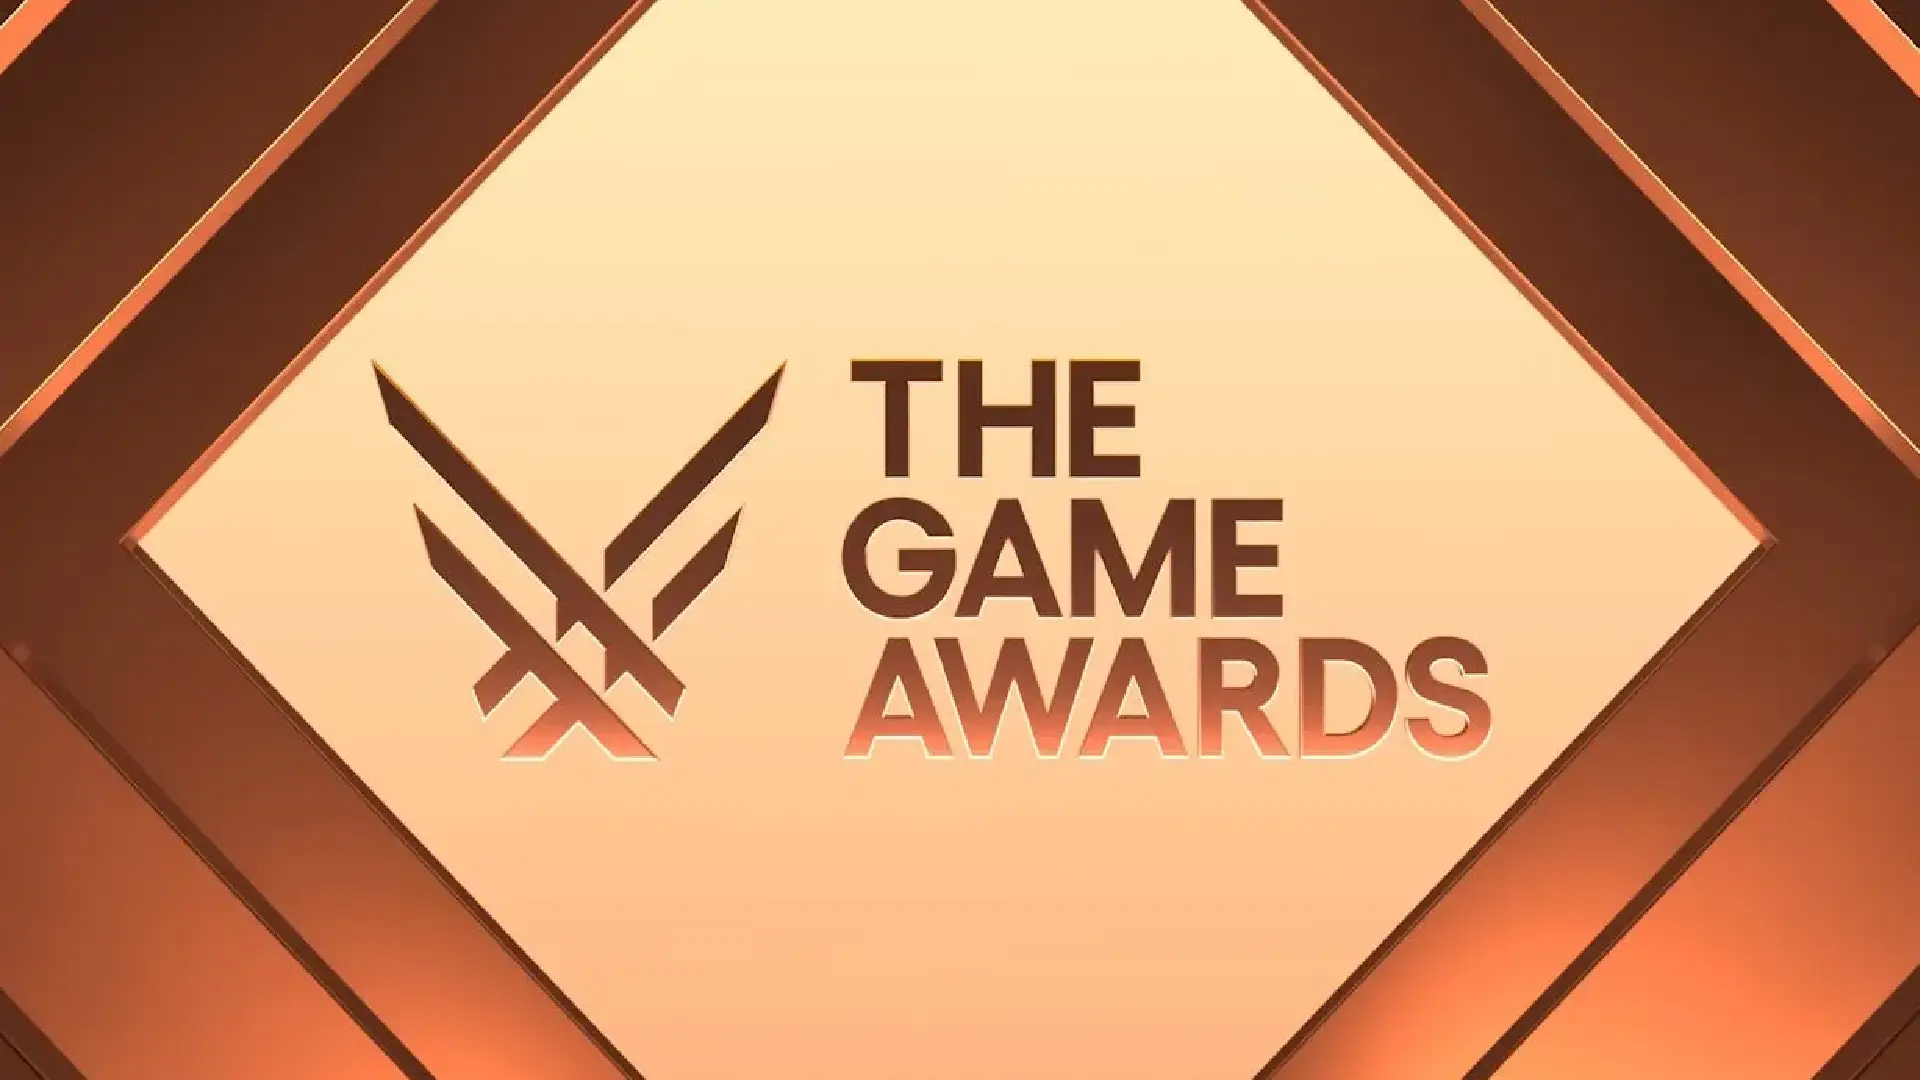 The Game Awards best fighting game nominees revealed though